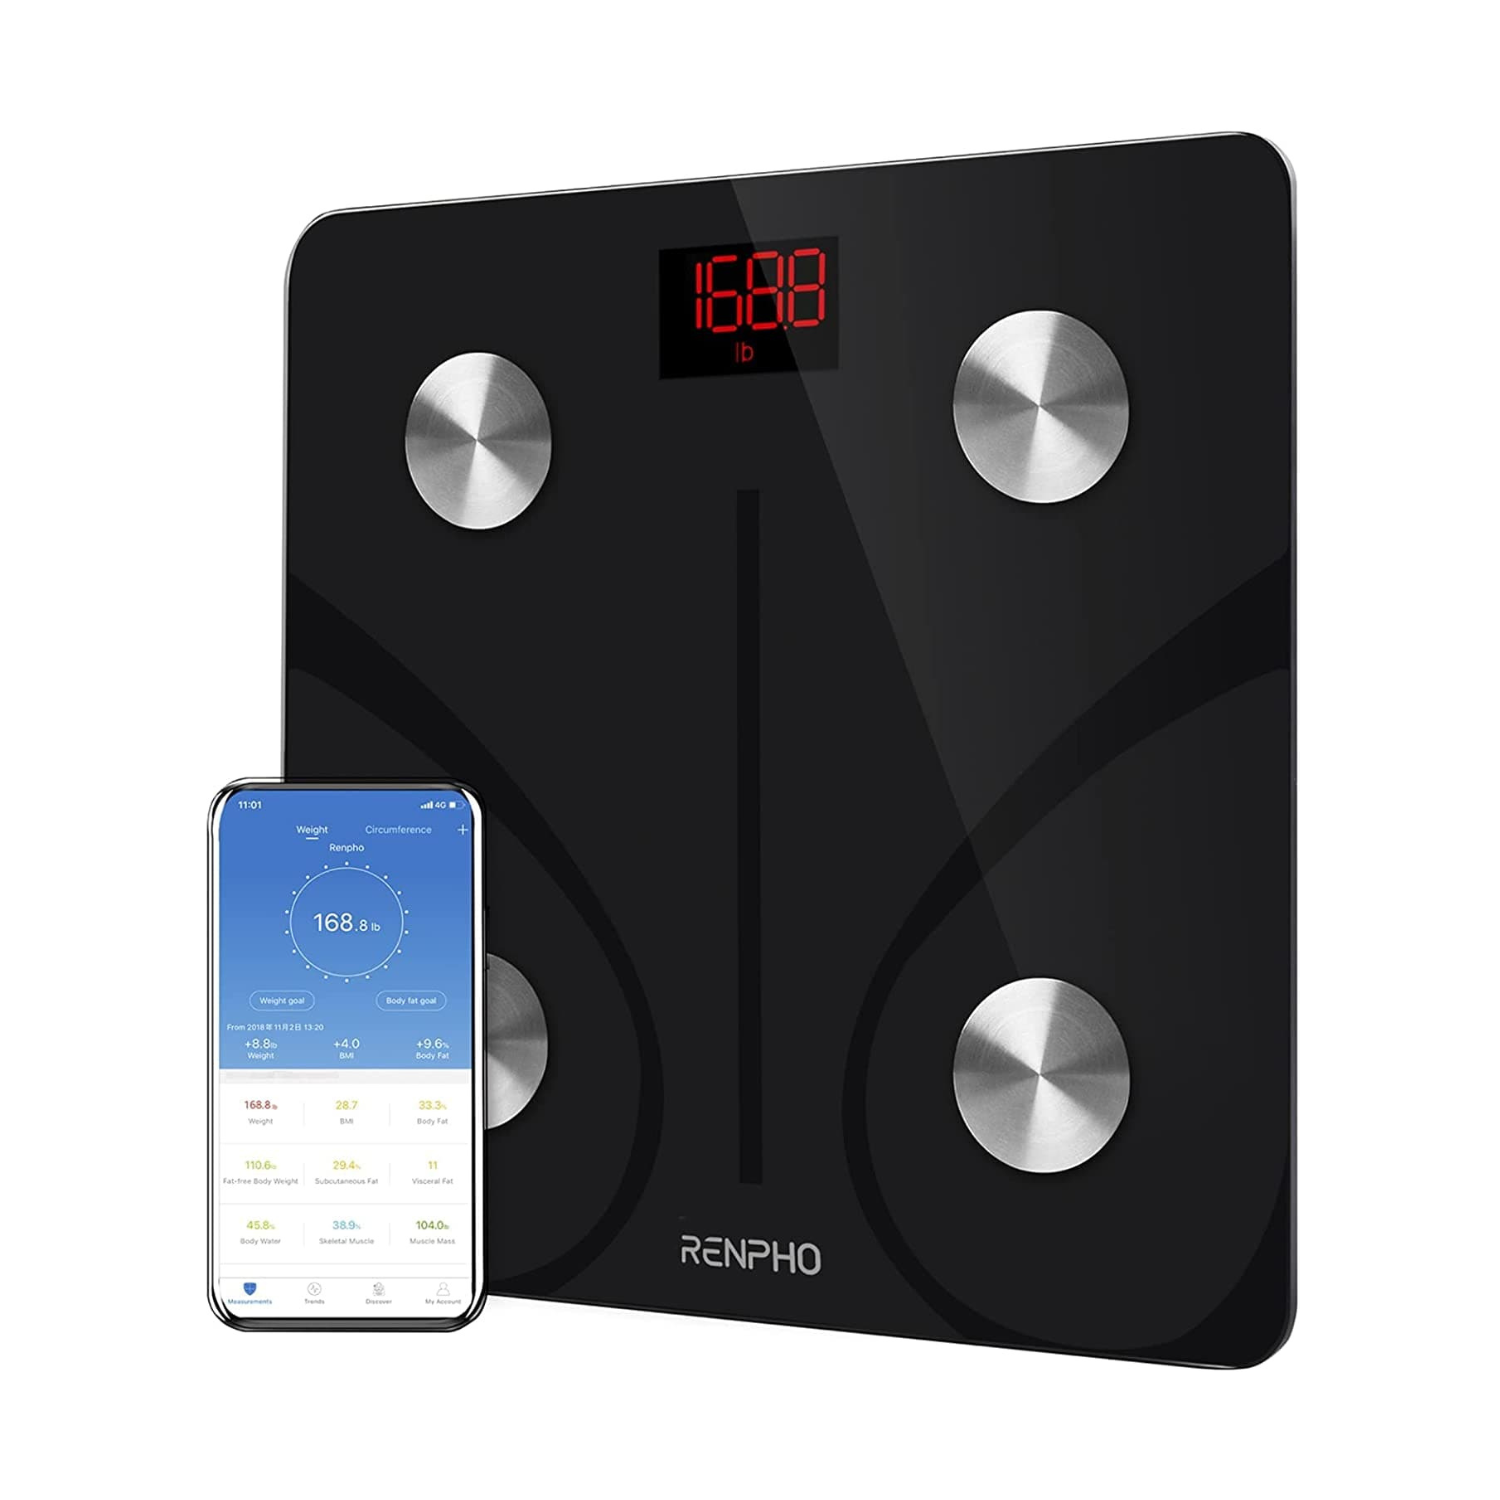 This RENPHO Bluetooth Measuring Tape Will Keep You Motivated - Men's Journal